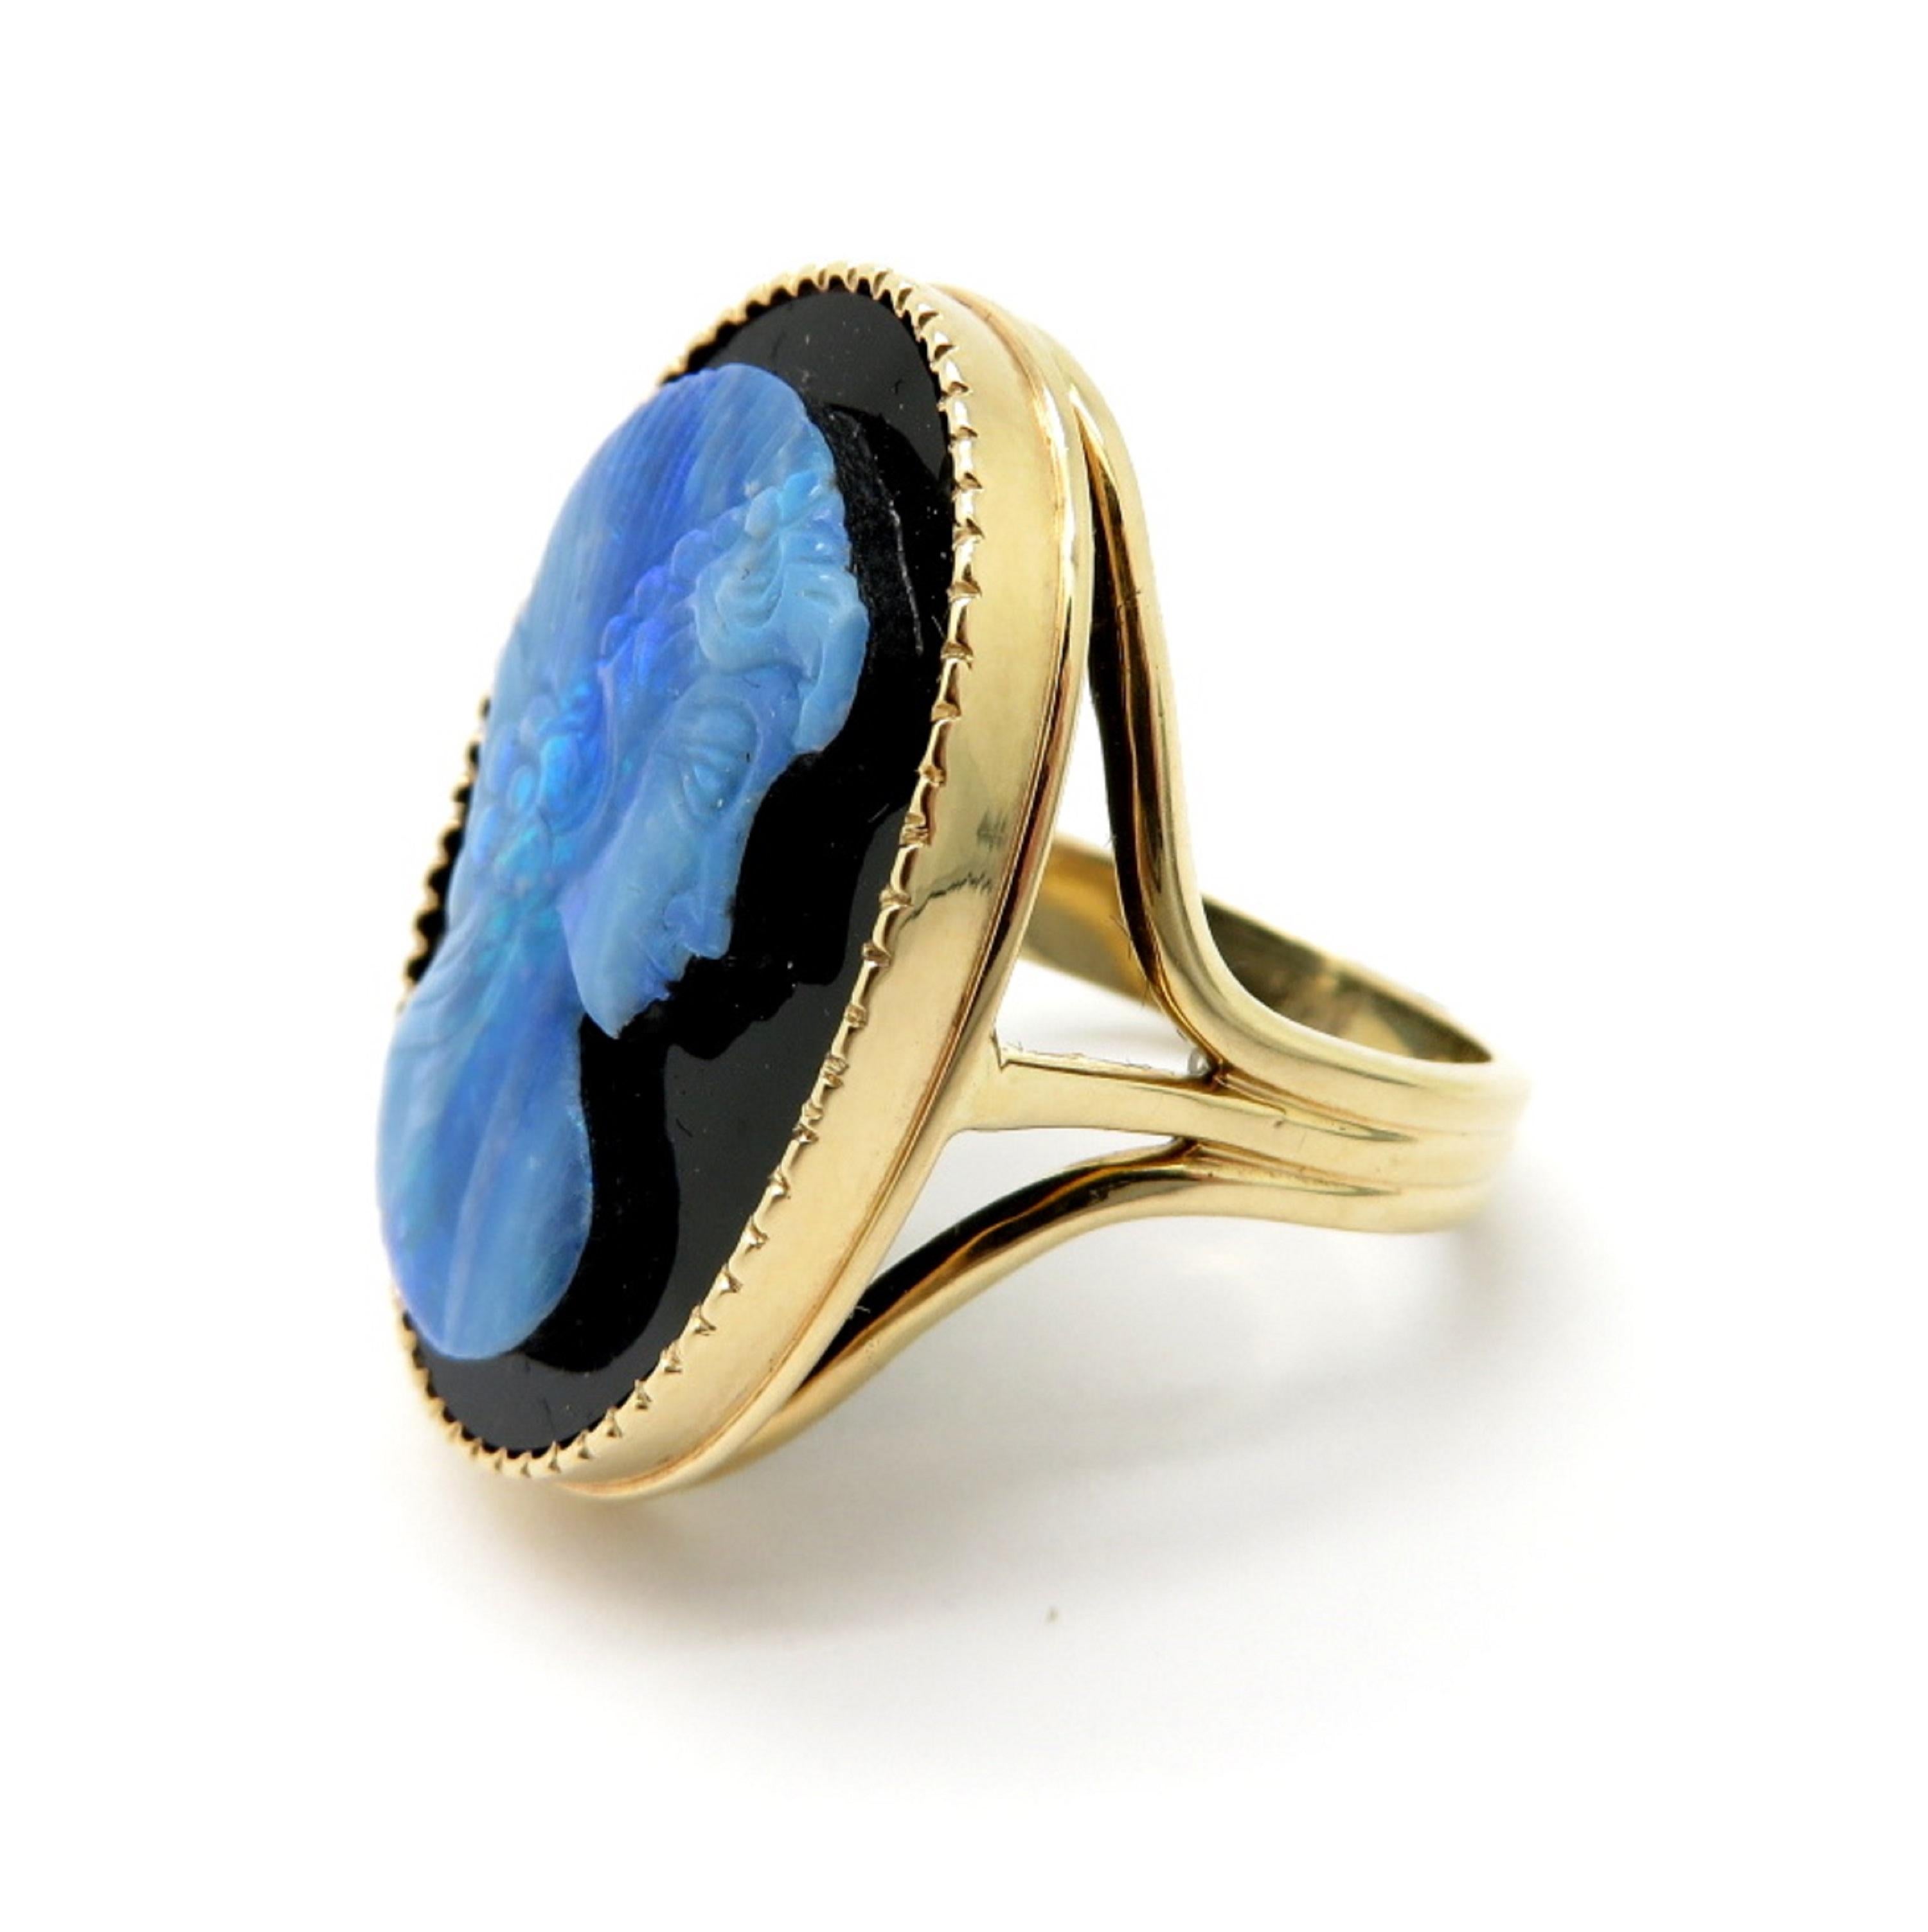 Estate 14K yellow gold onyx and oval cameo ring. Showcasing one fine quality black opal carved in the shape of a woman’s portrait. Displaying one oval black onyx gemstone framed in yellow gold. The ring has a high polish finish. It is a finger size